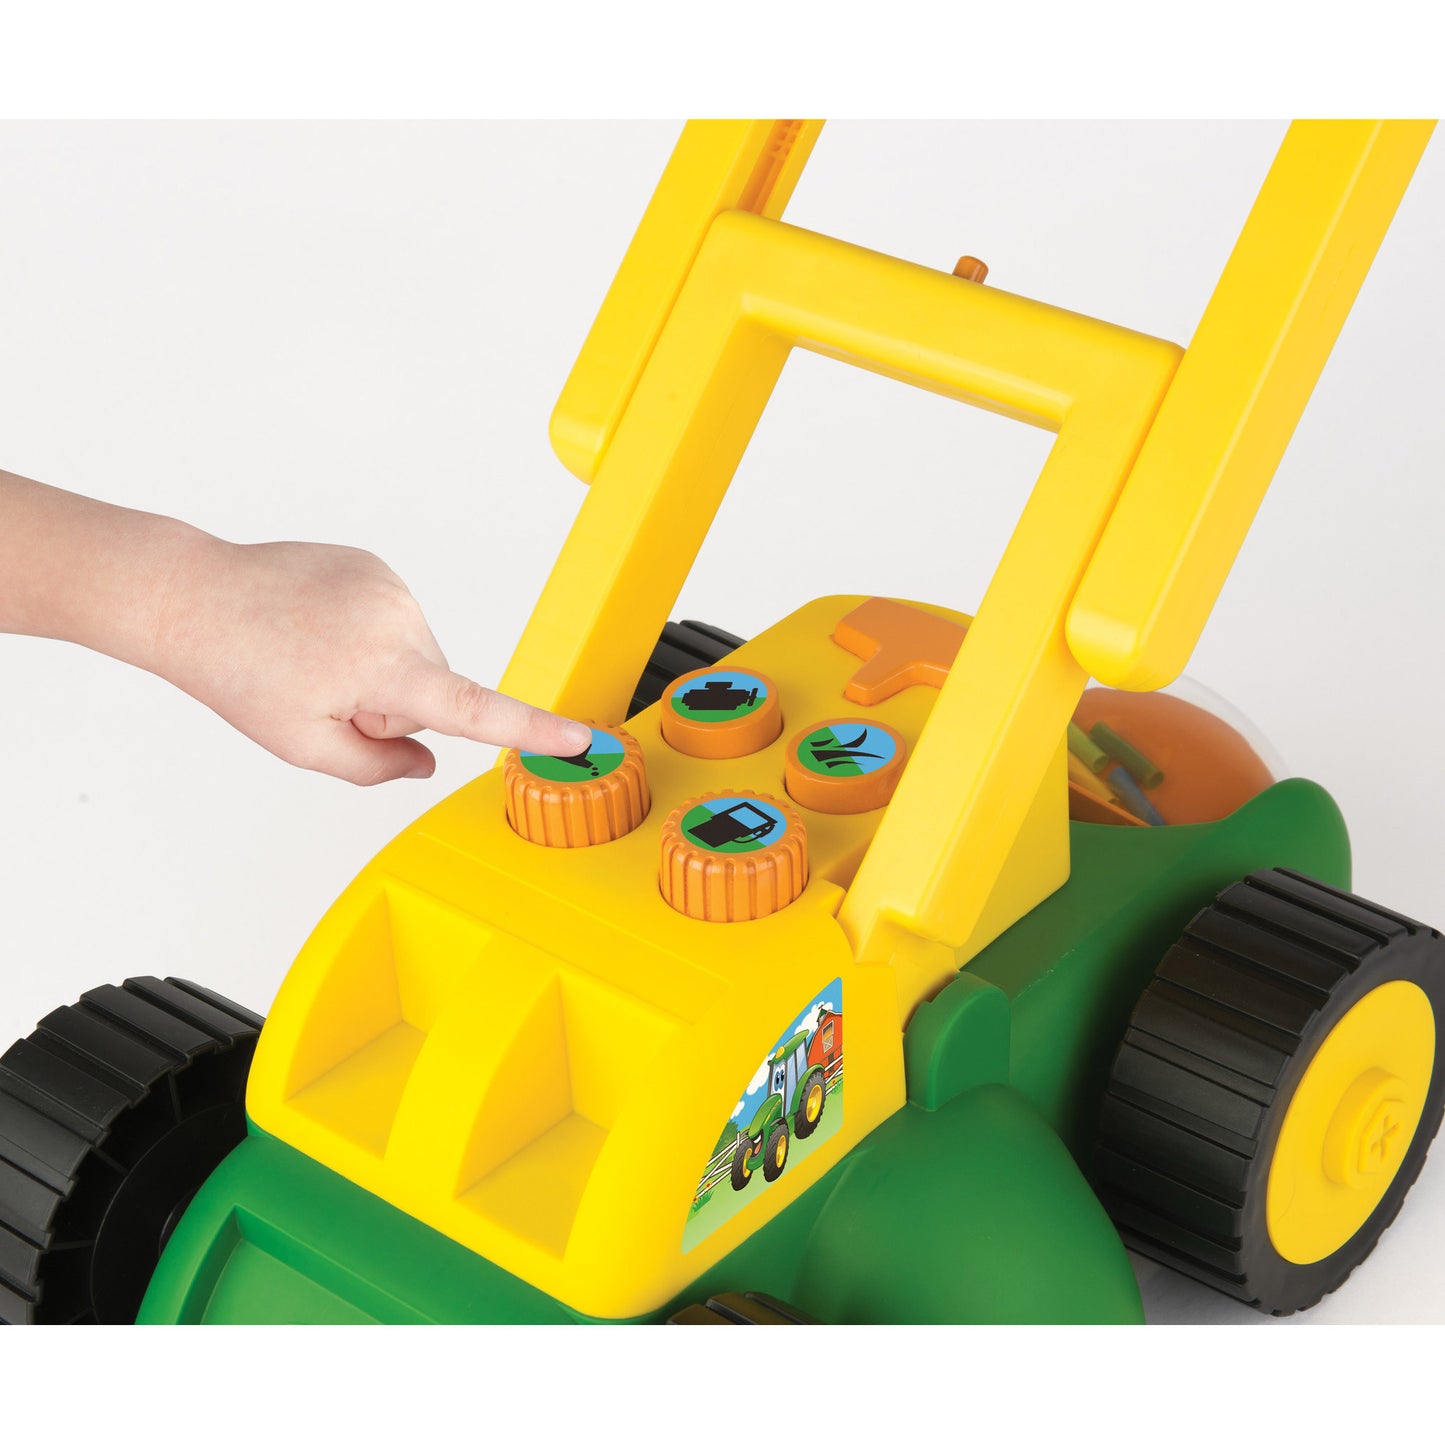 John Deere - Lawn Mower with Sounds